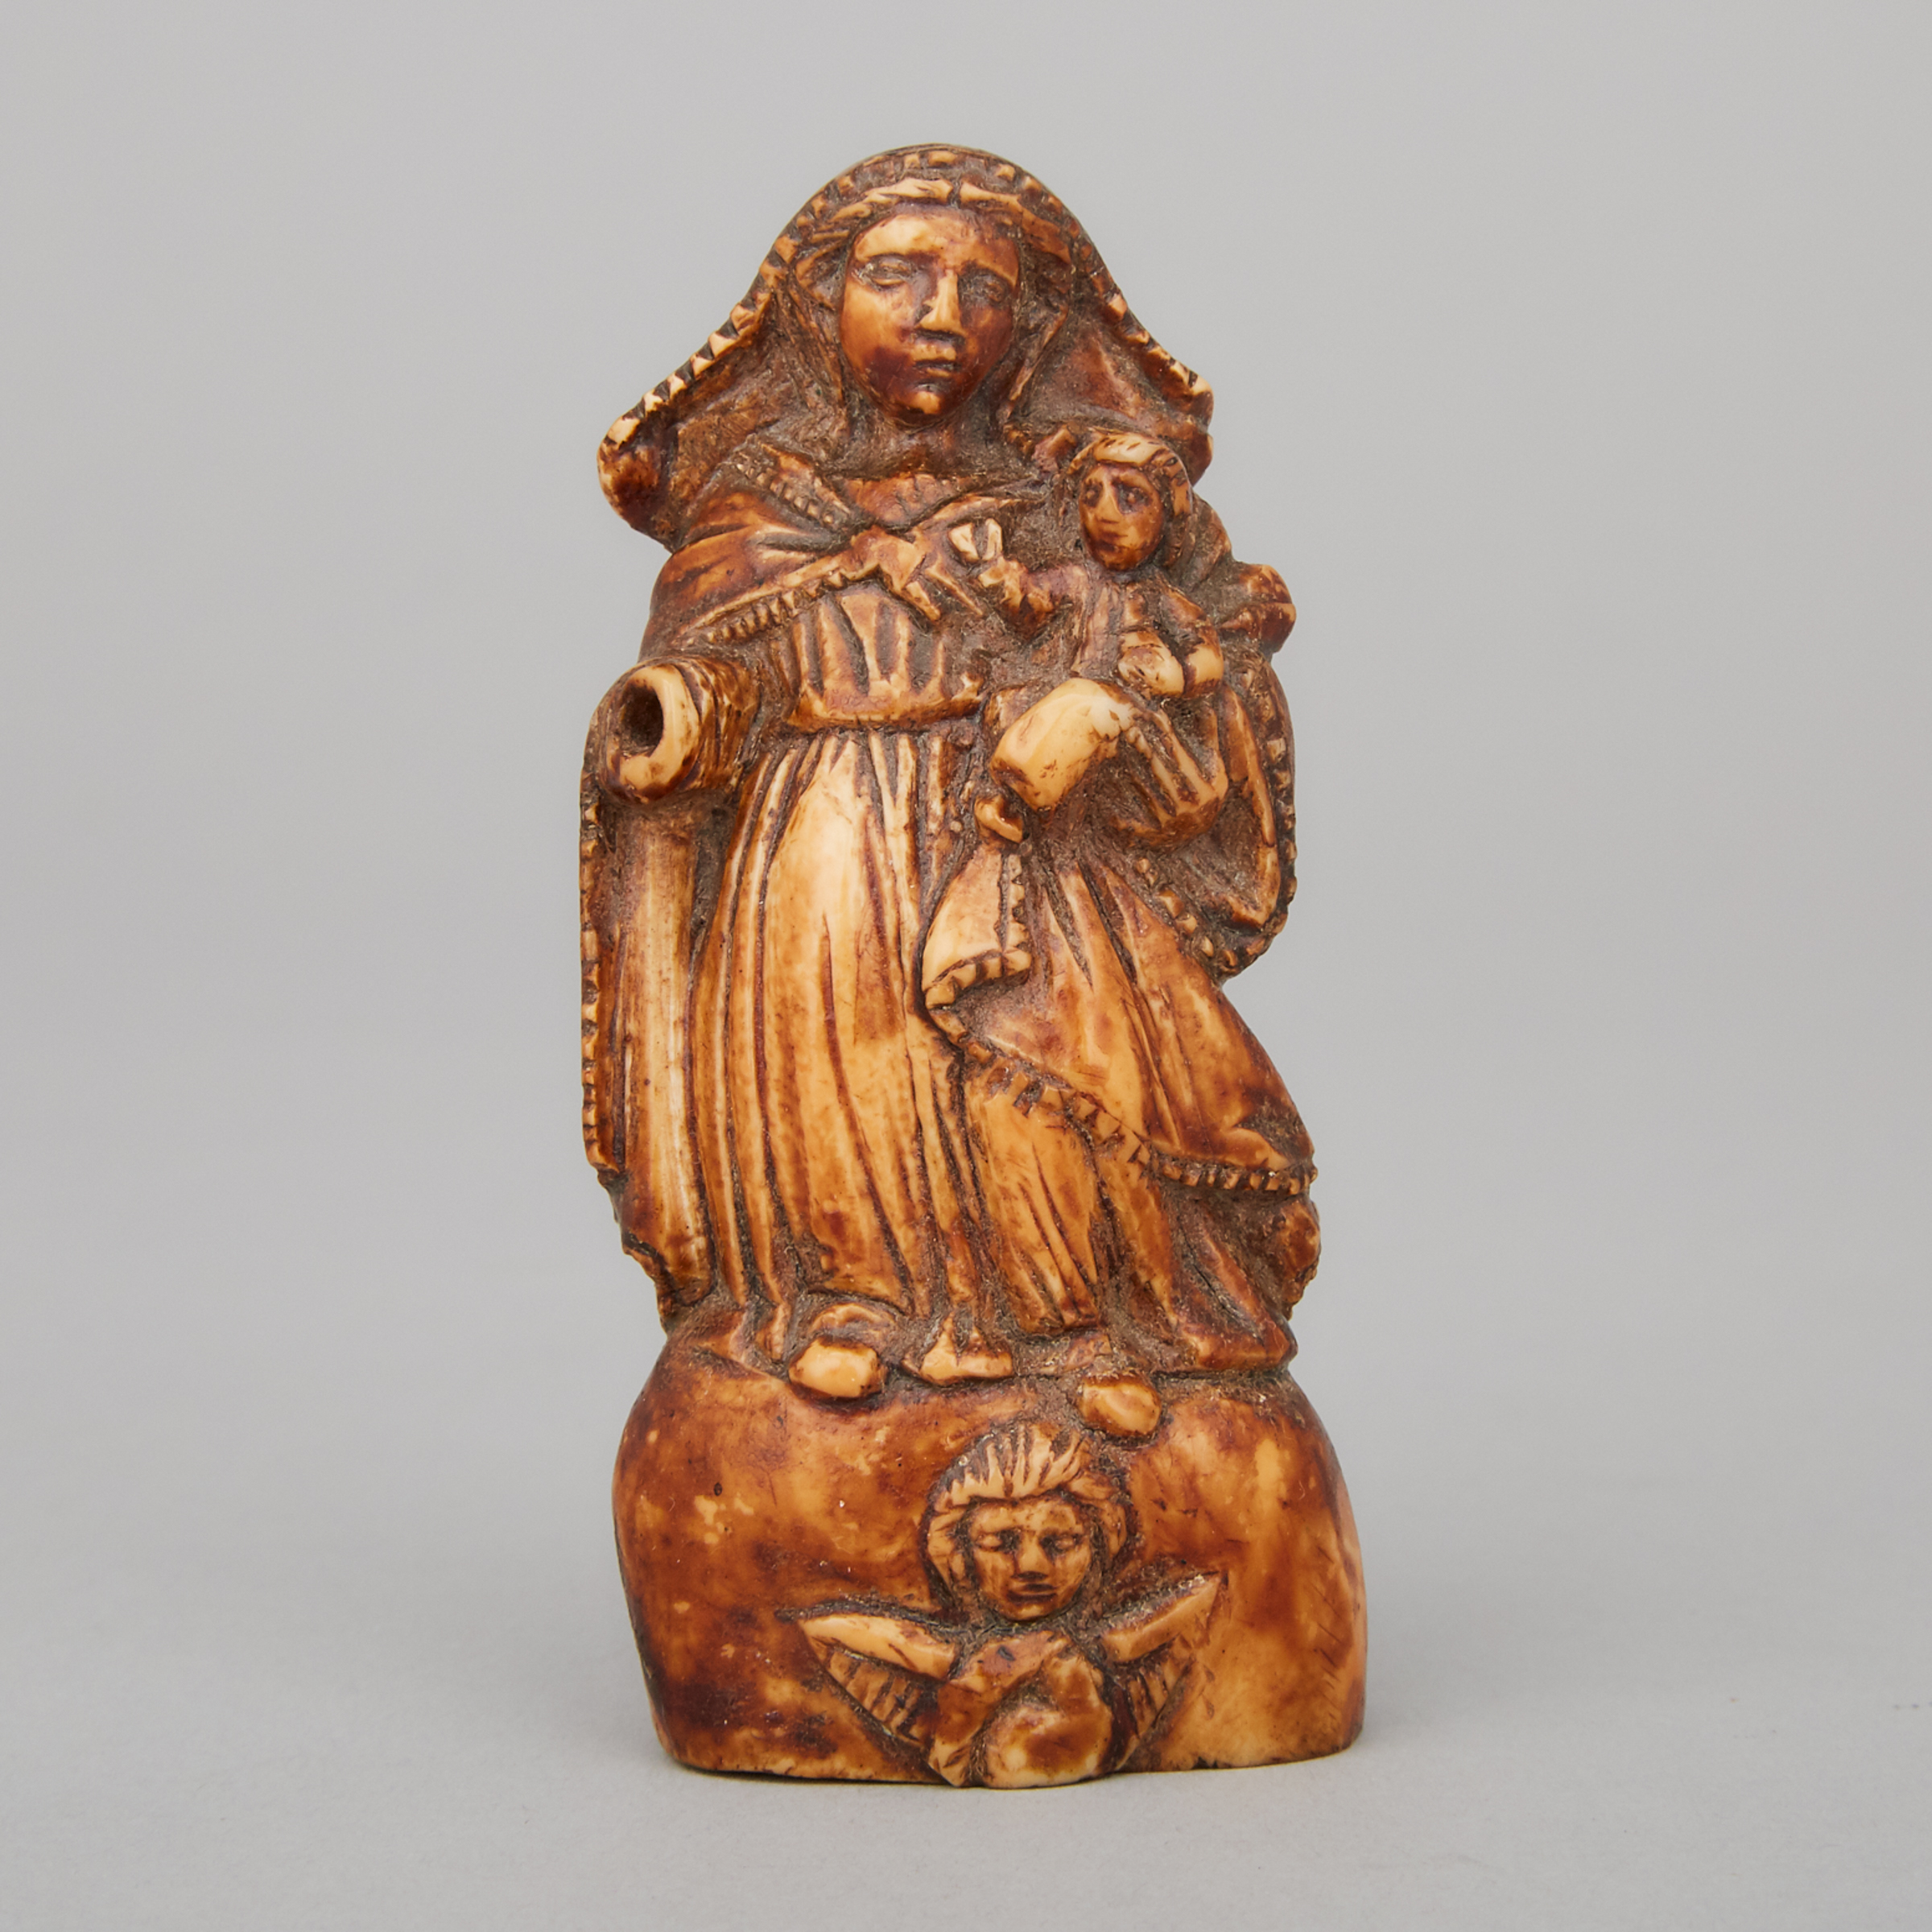 Continental Marine Ivory Group of the Virgin and Child, 16th/17th century